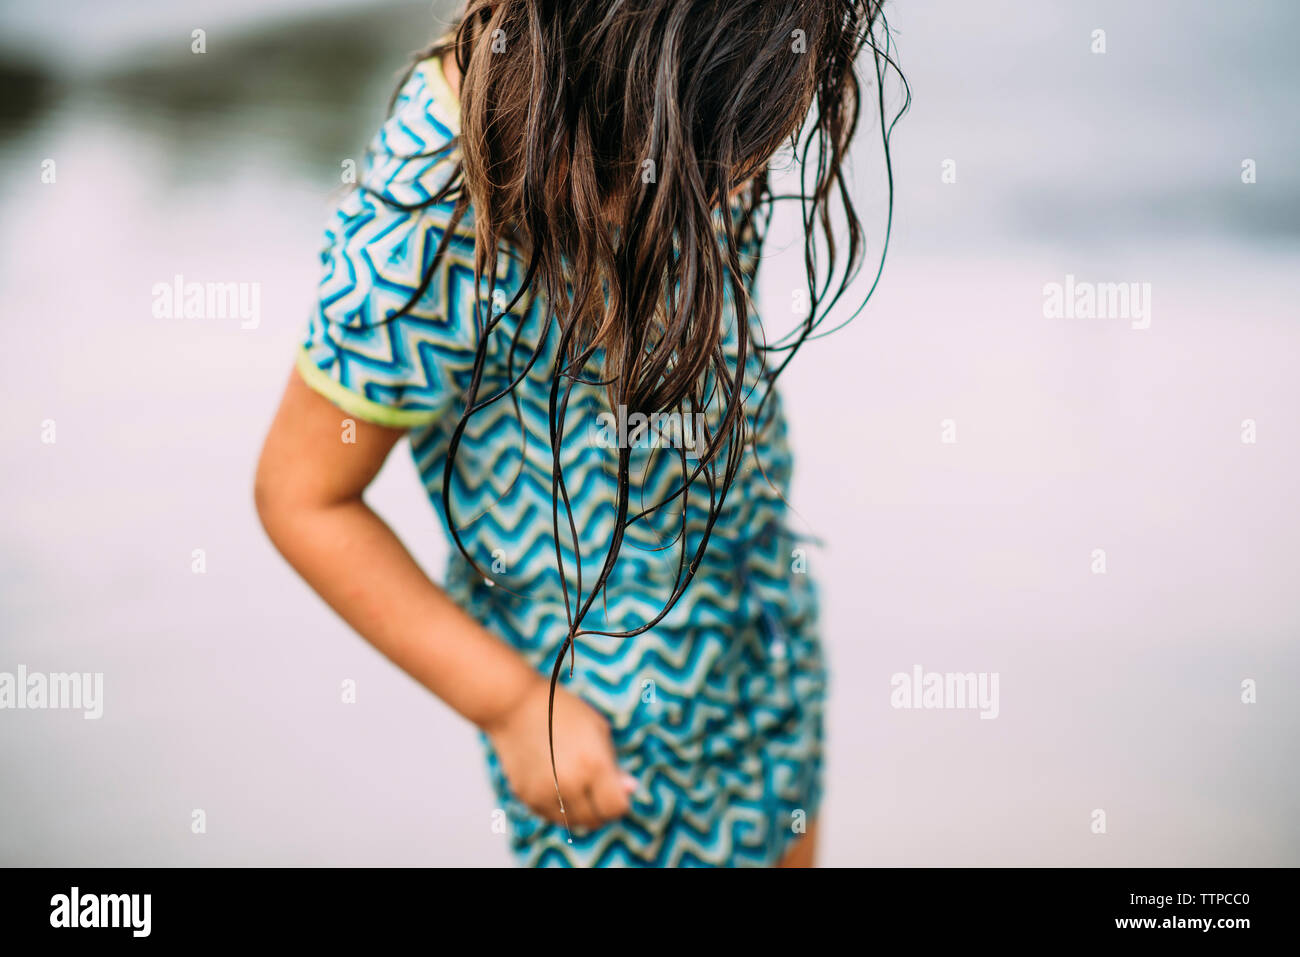 Midsection of girl standing outdoors Stock Photo